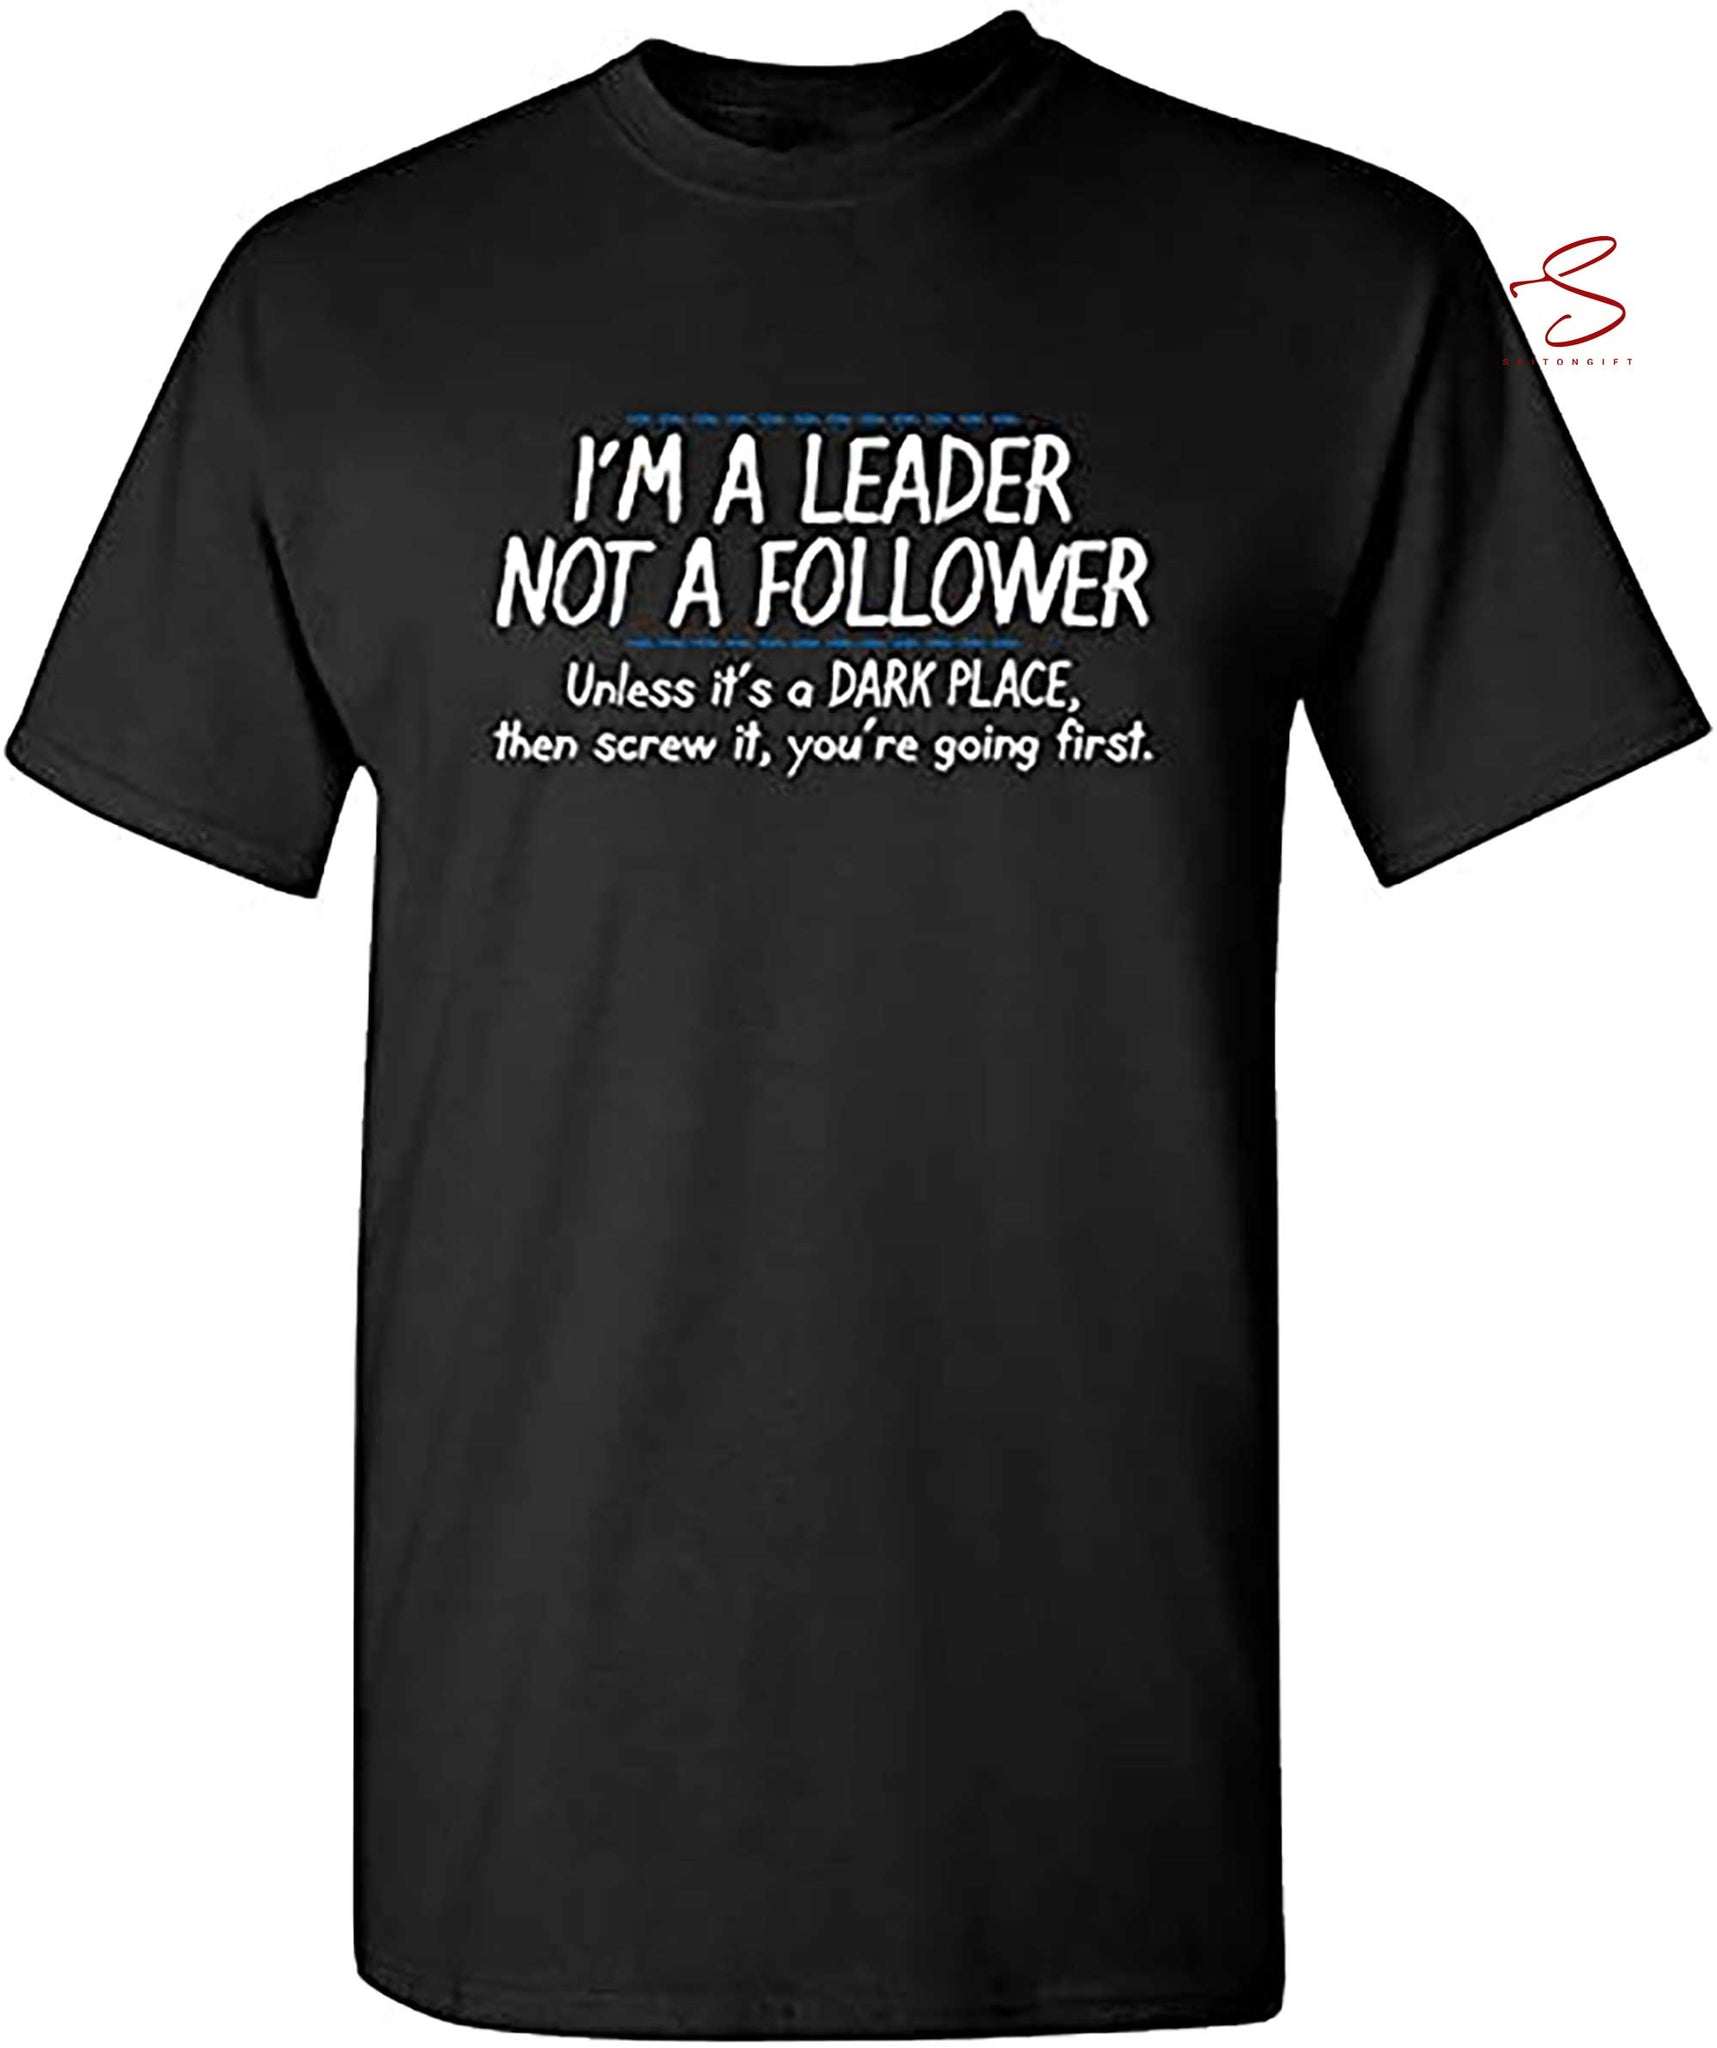 Skitongift I'm A Leader Graphic Novelty Sarcastic Funny T Shirt Funny Shirts Long Sleeve Tee Hoody Hoodie heavyweight pullover hoodies Sweater